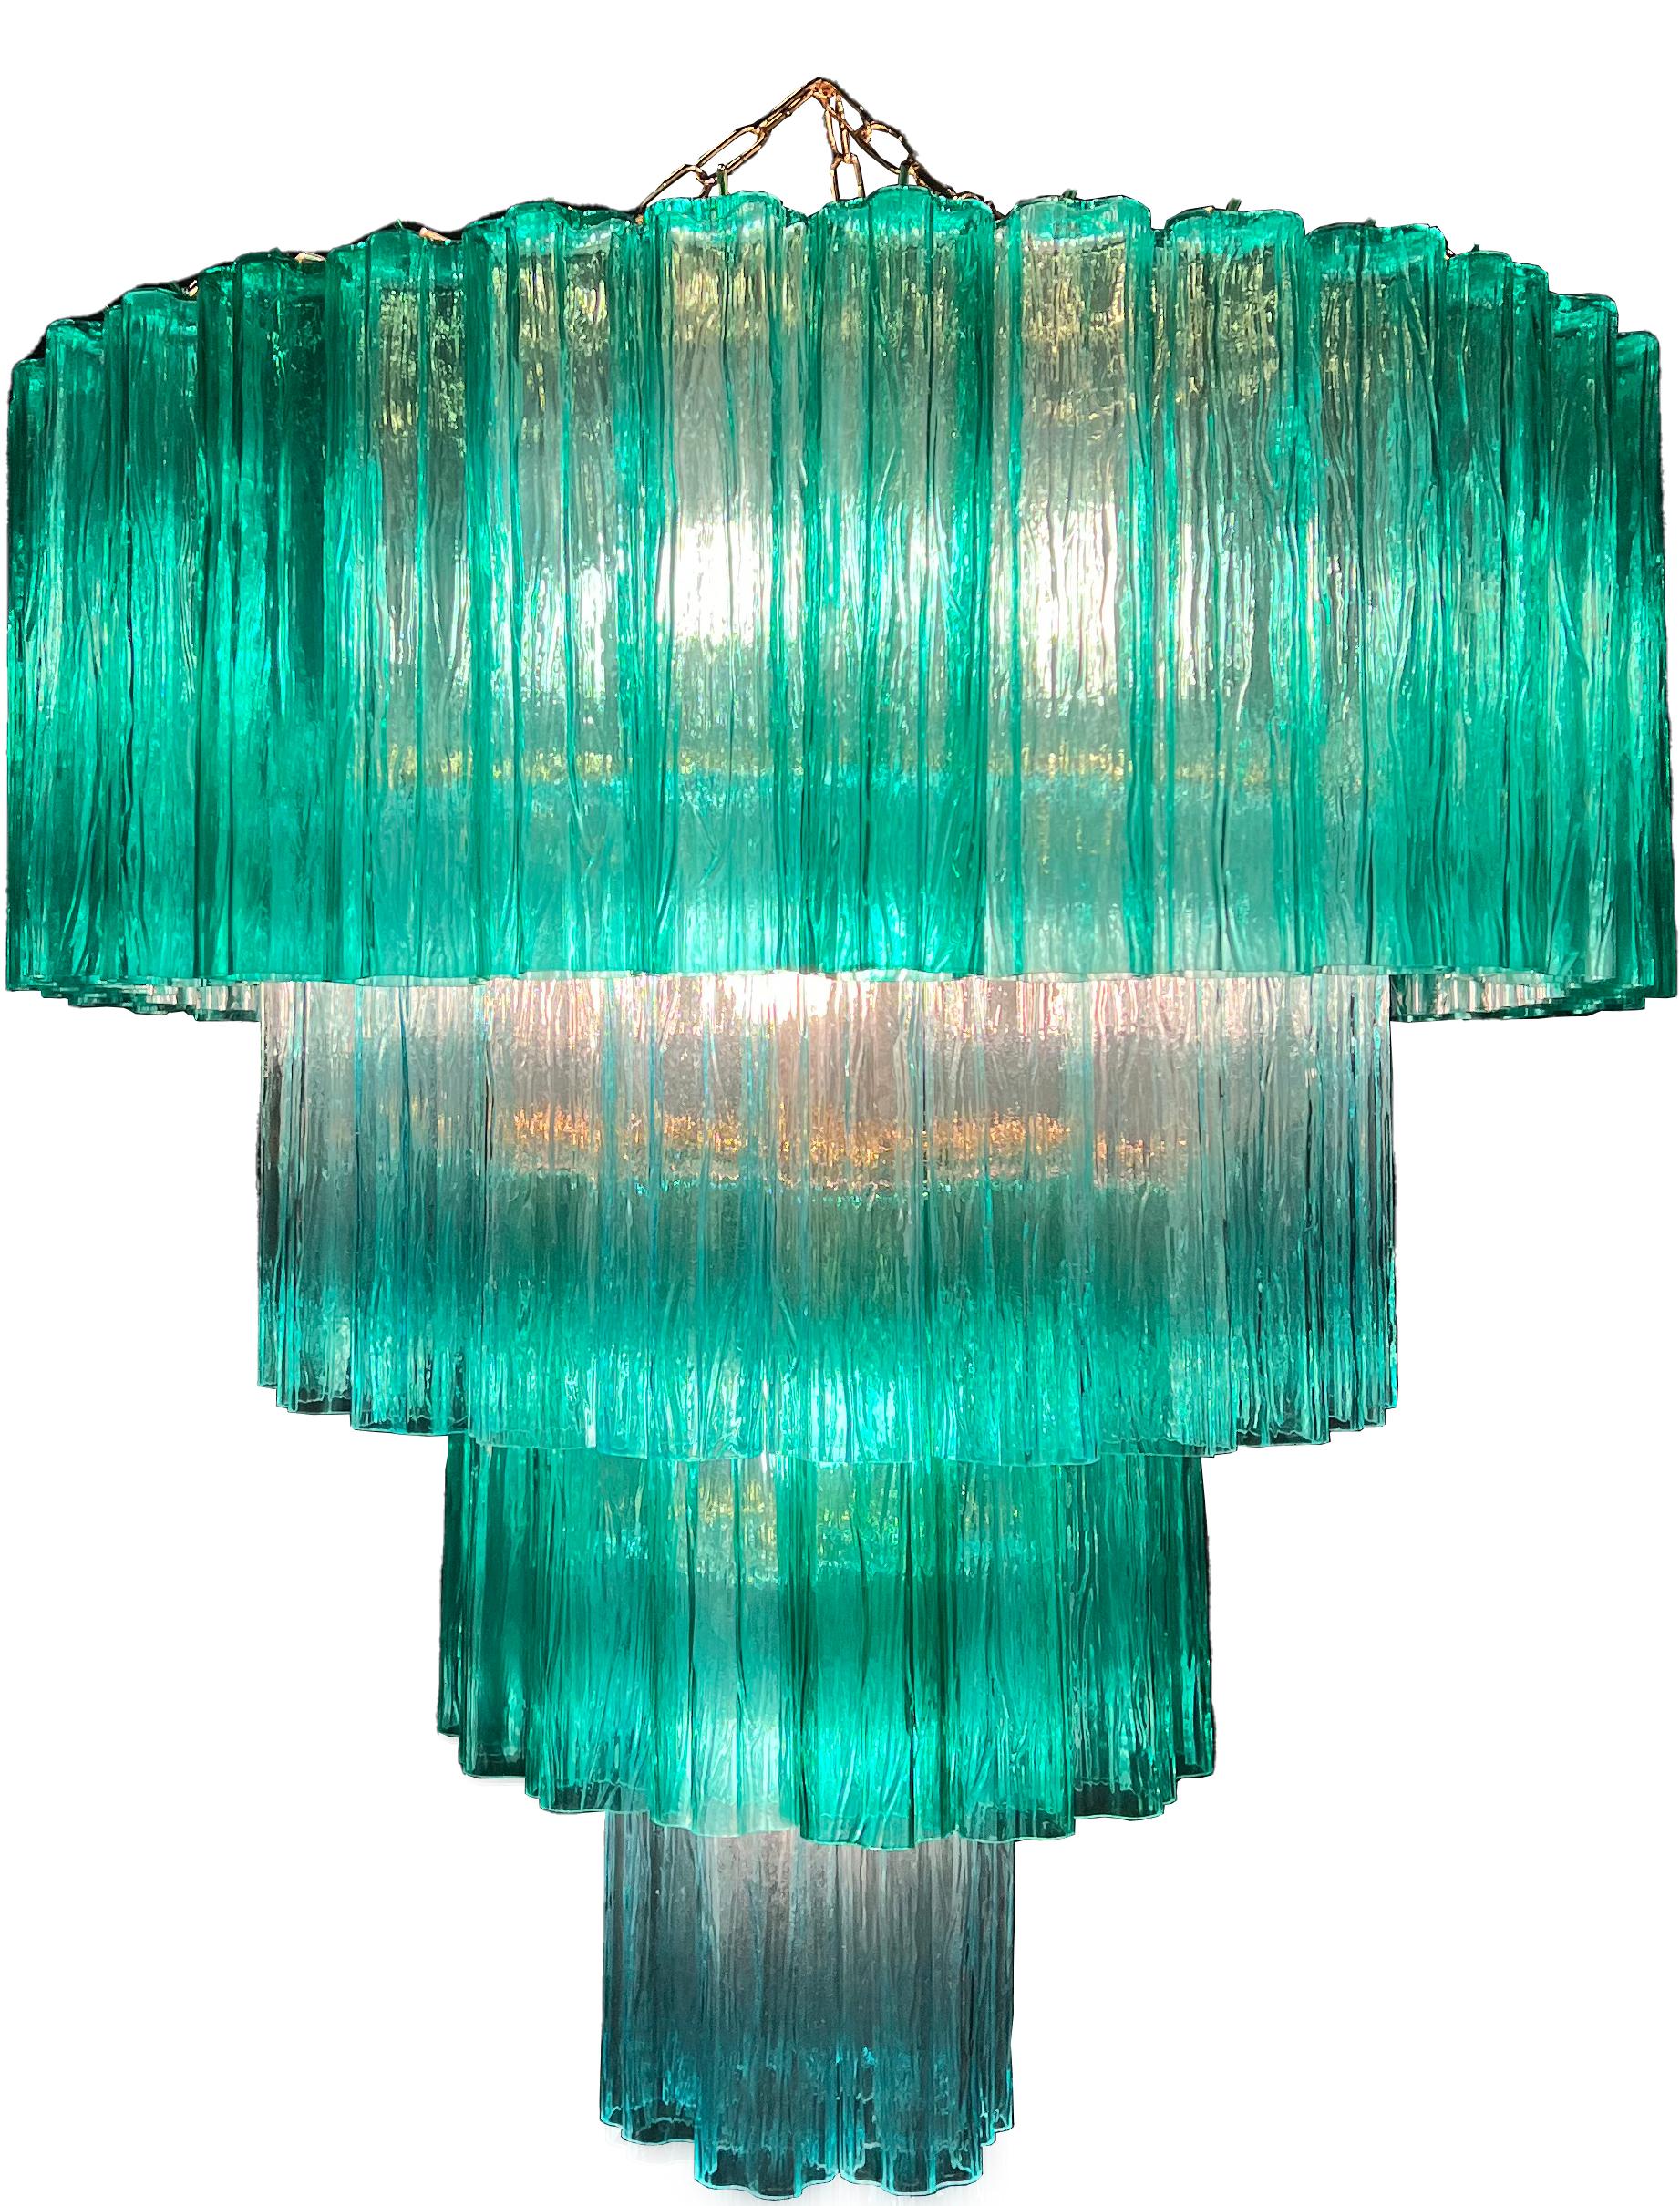 Gold Plate Amazing and Charming Pair of Italian Chandeliers by Valentina Planta, Murano